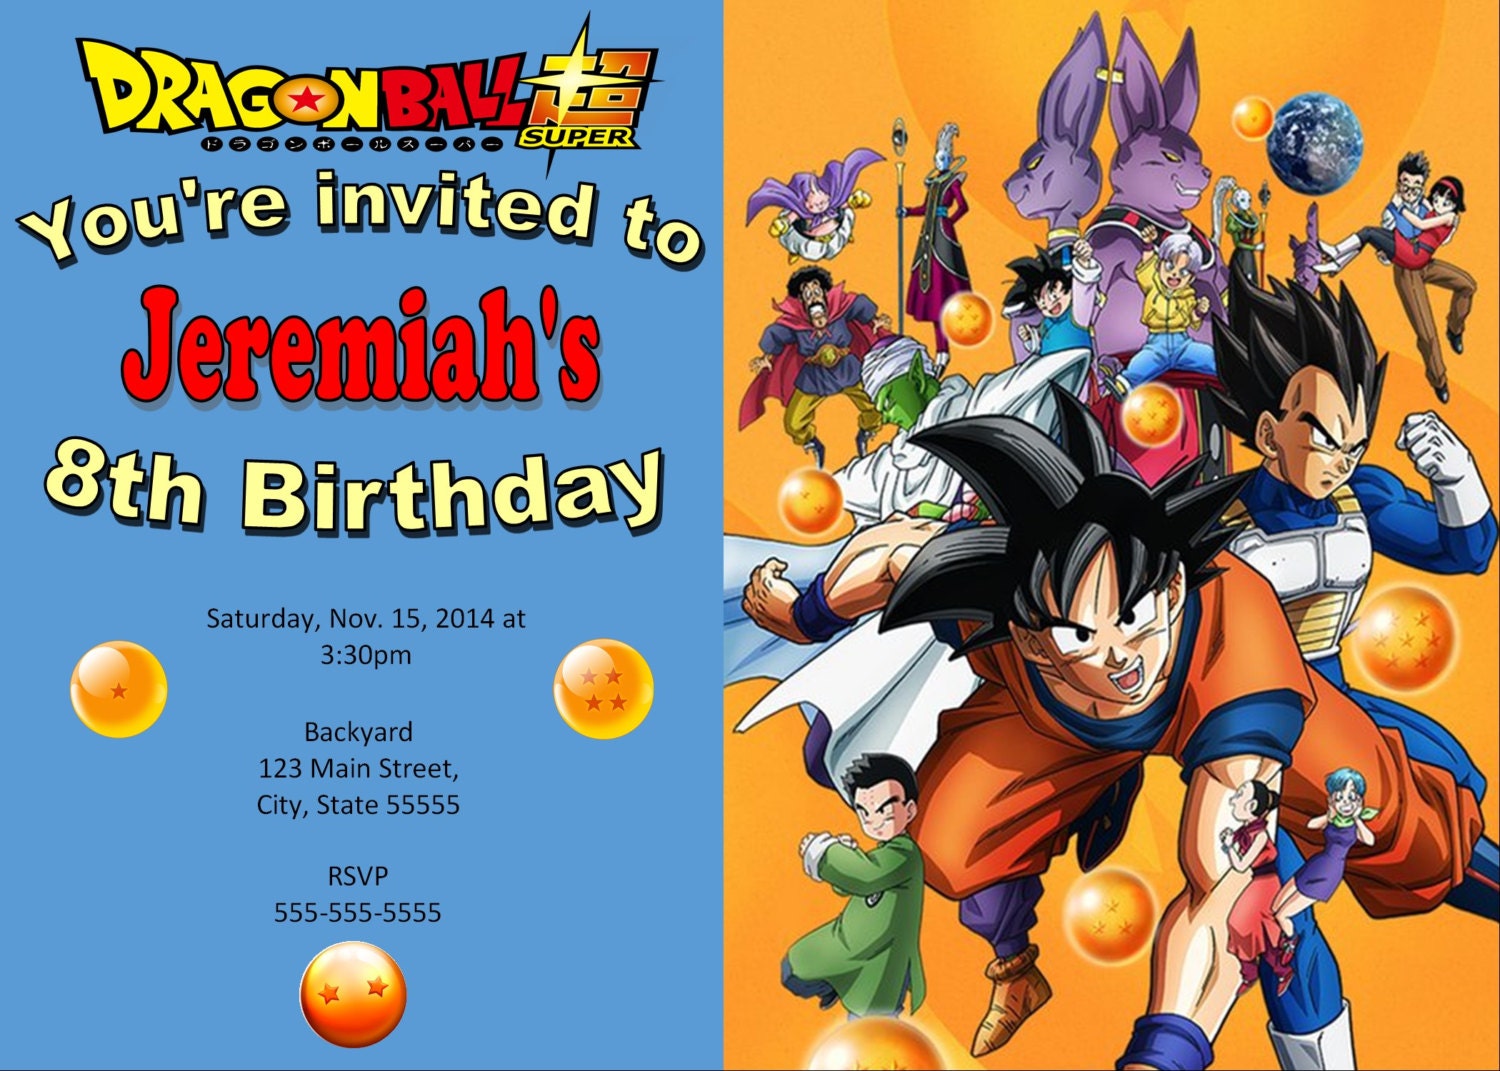 Pin by Kristle Beaudet on Dragonball Birthday Party ideas Dragon ball